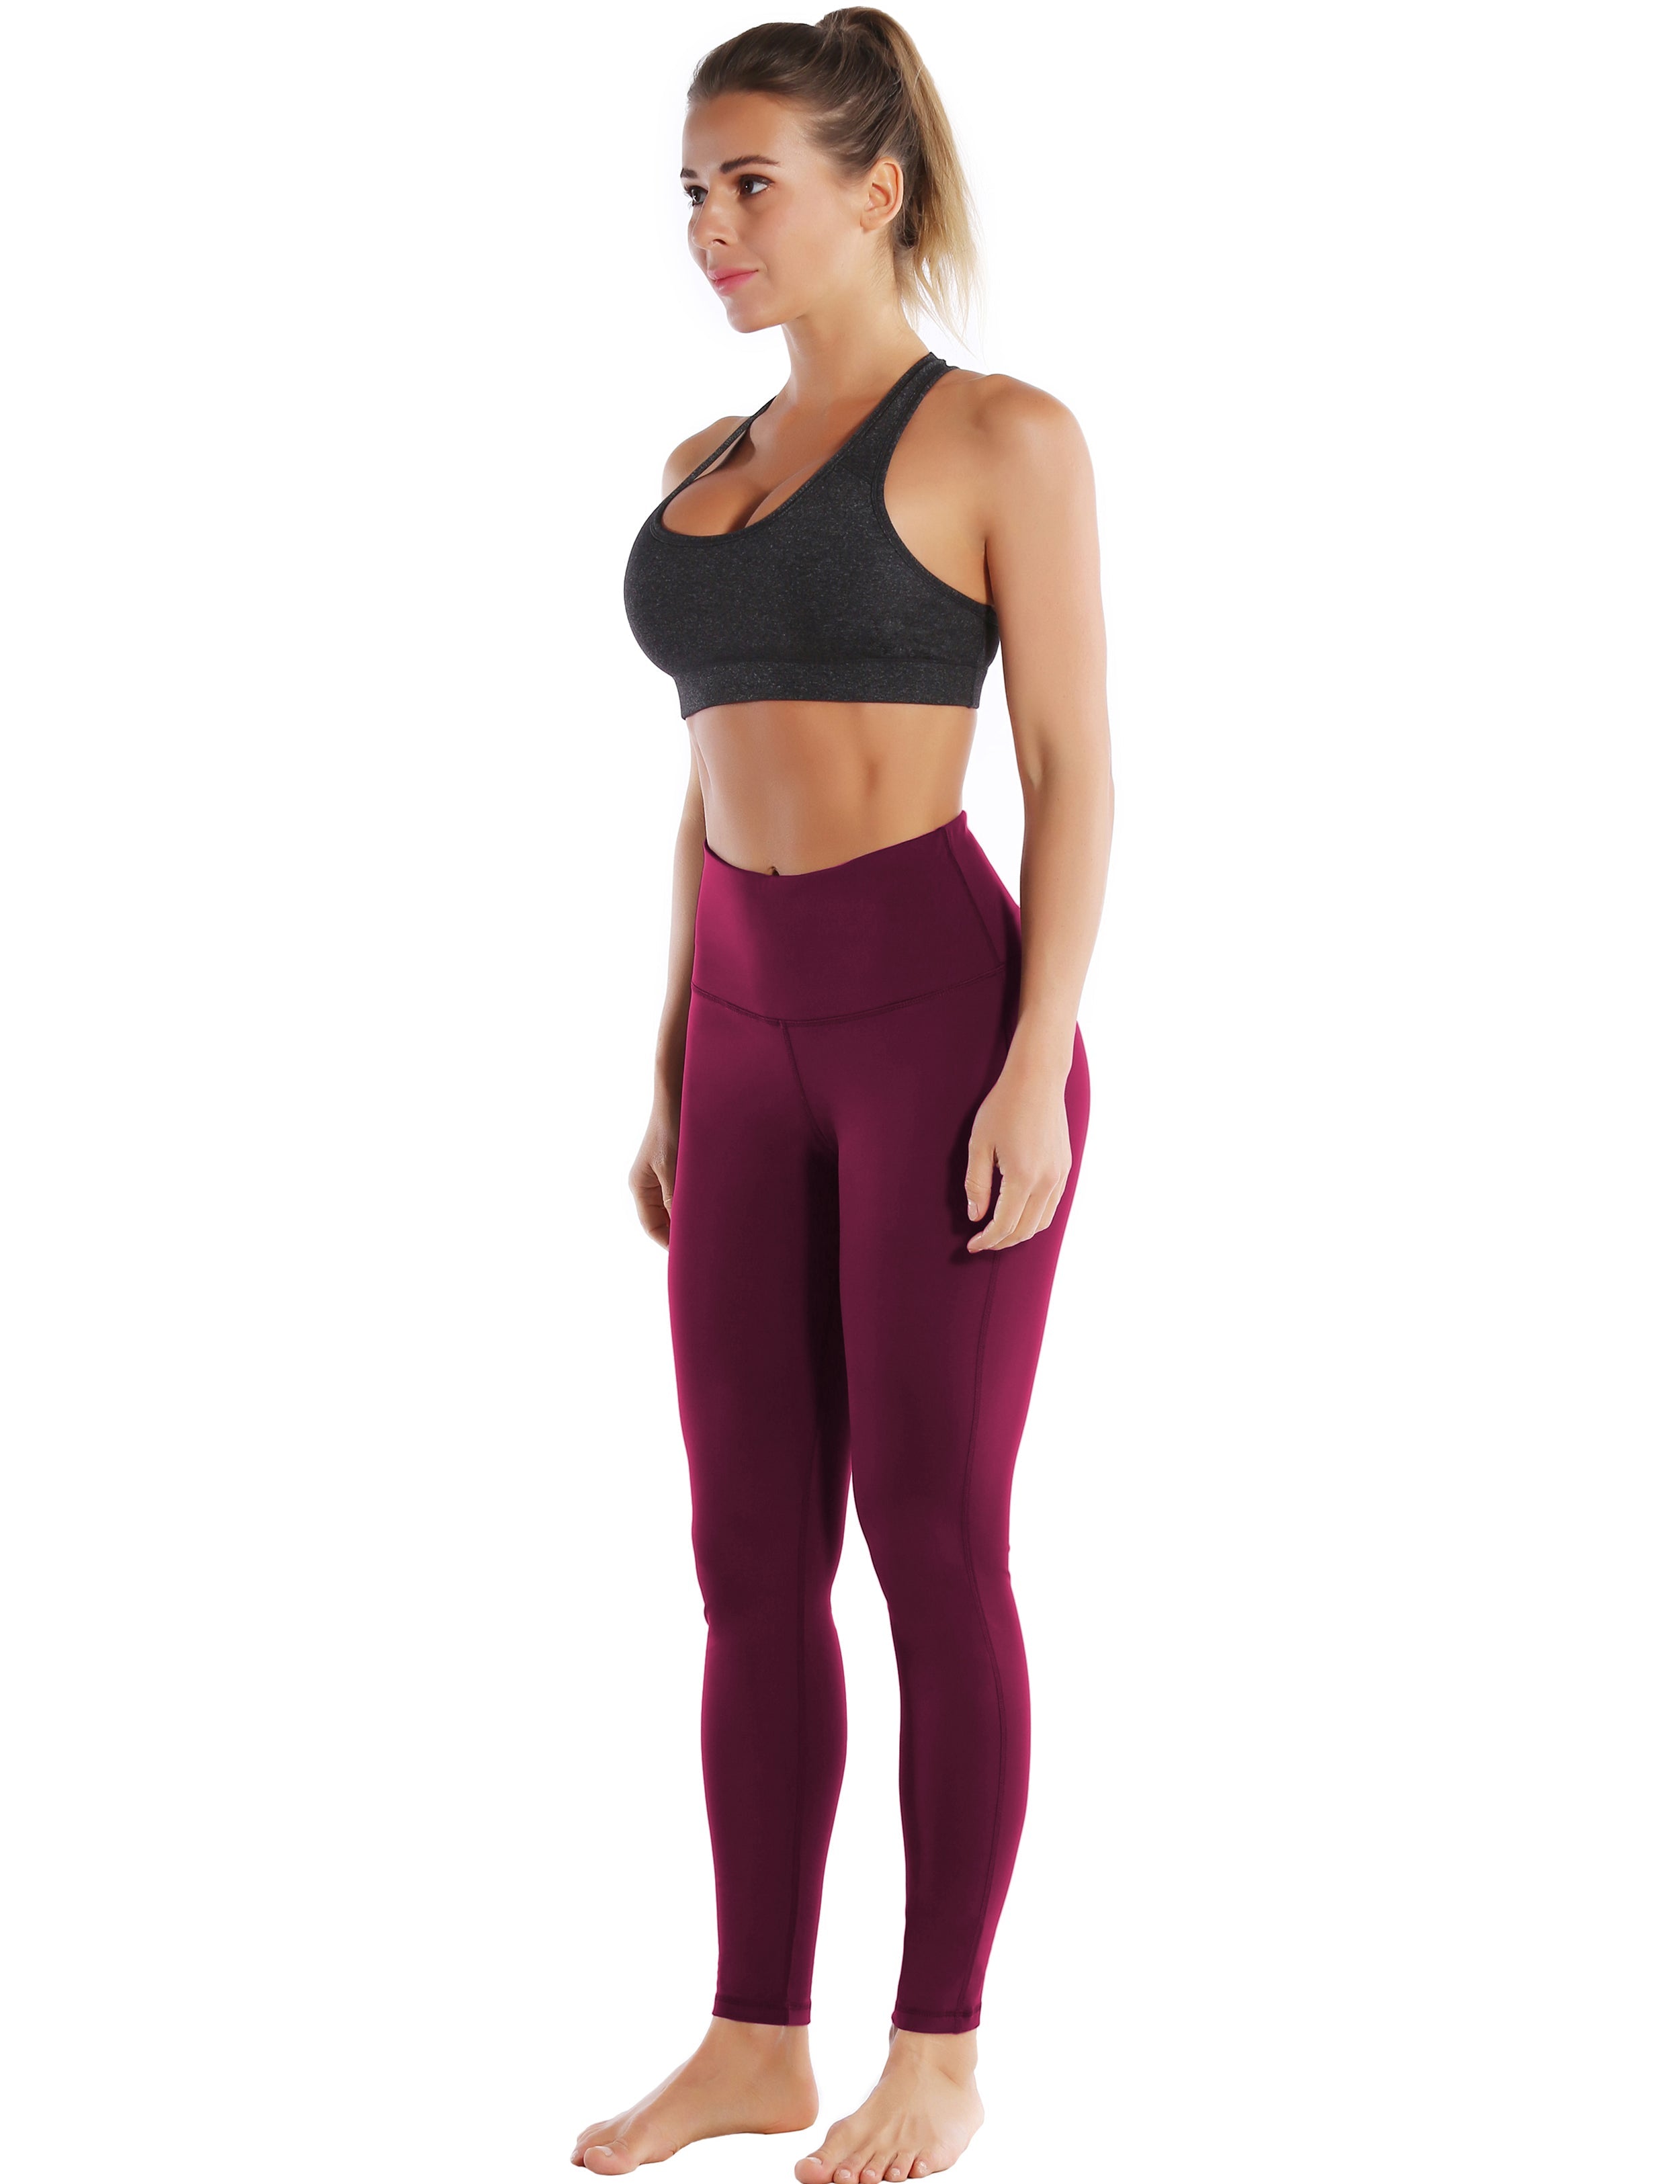 High Waist Side Line Pilates Pants grapevine Side Line is Make Your Legs Look Longer and Thinner 75%Nylon/25%Spandex Fabric doesn't attract lint easily 4-way stretch No see-through Moisture-wicking Tummy control Inner pocket Two lengths